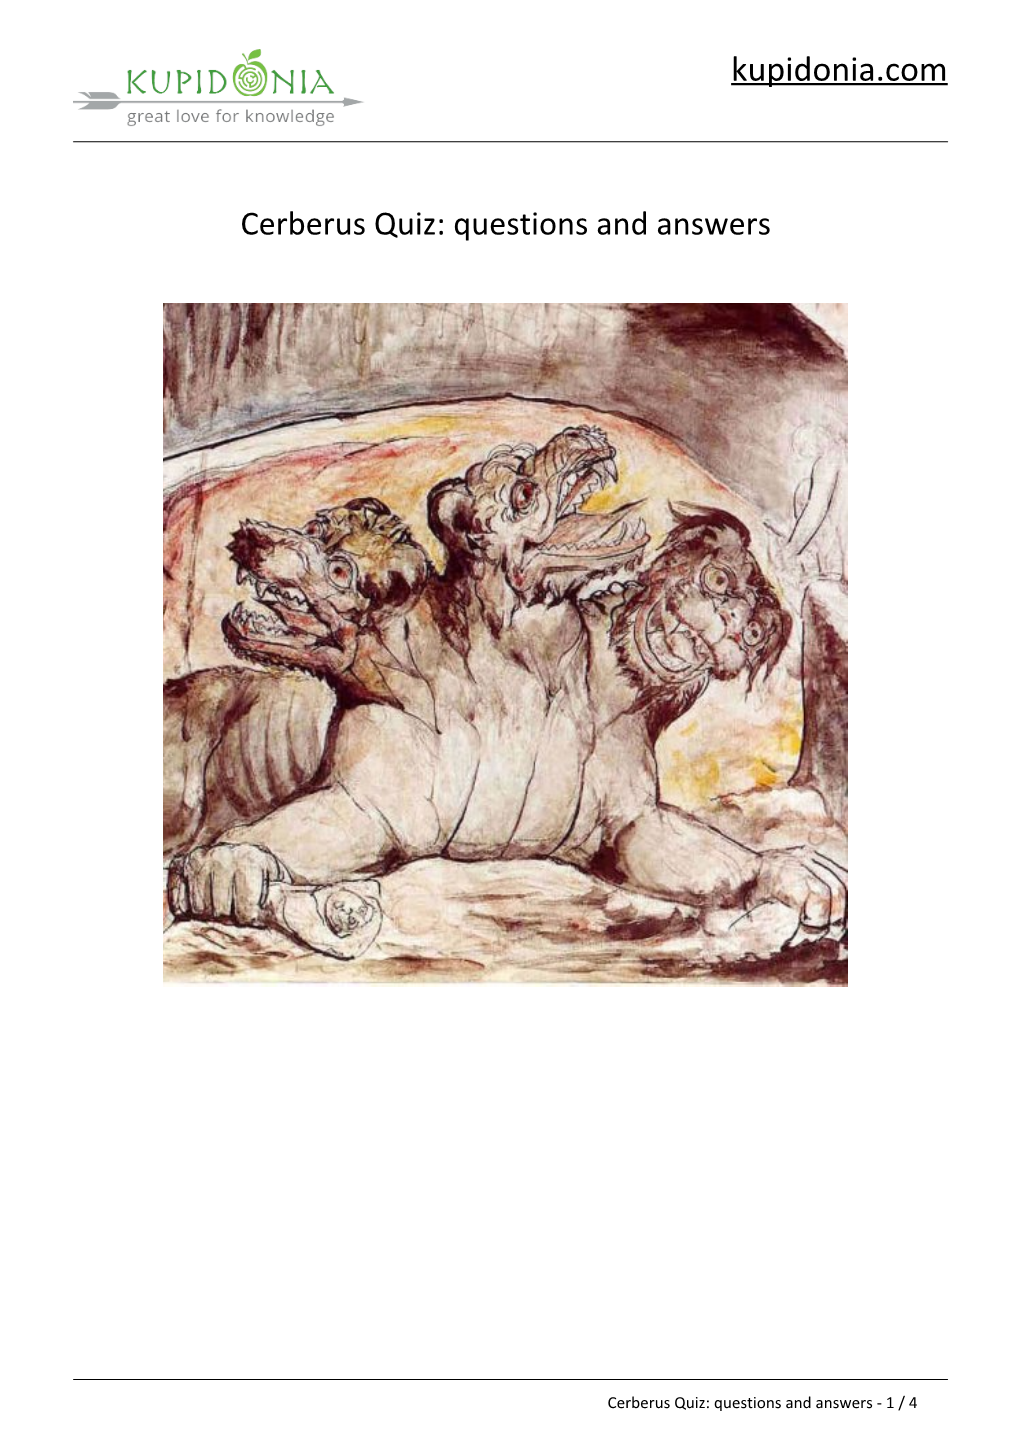 Cerberus Quiz: Questions and Answers